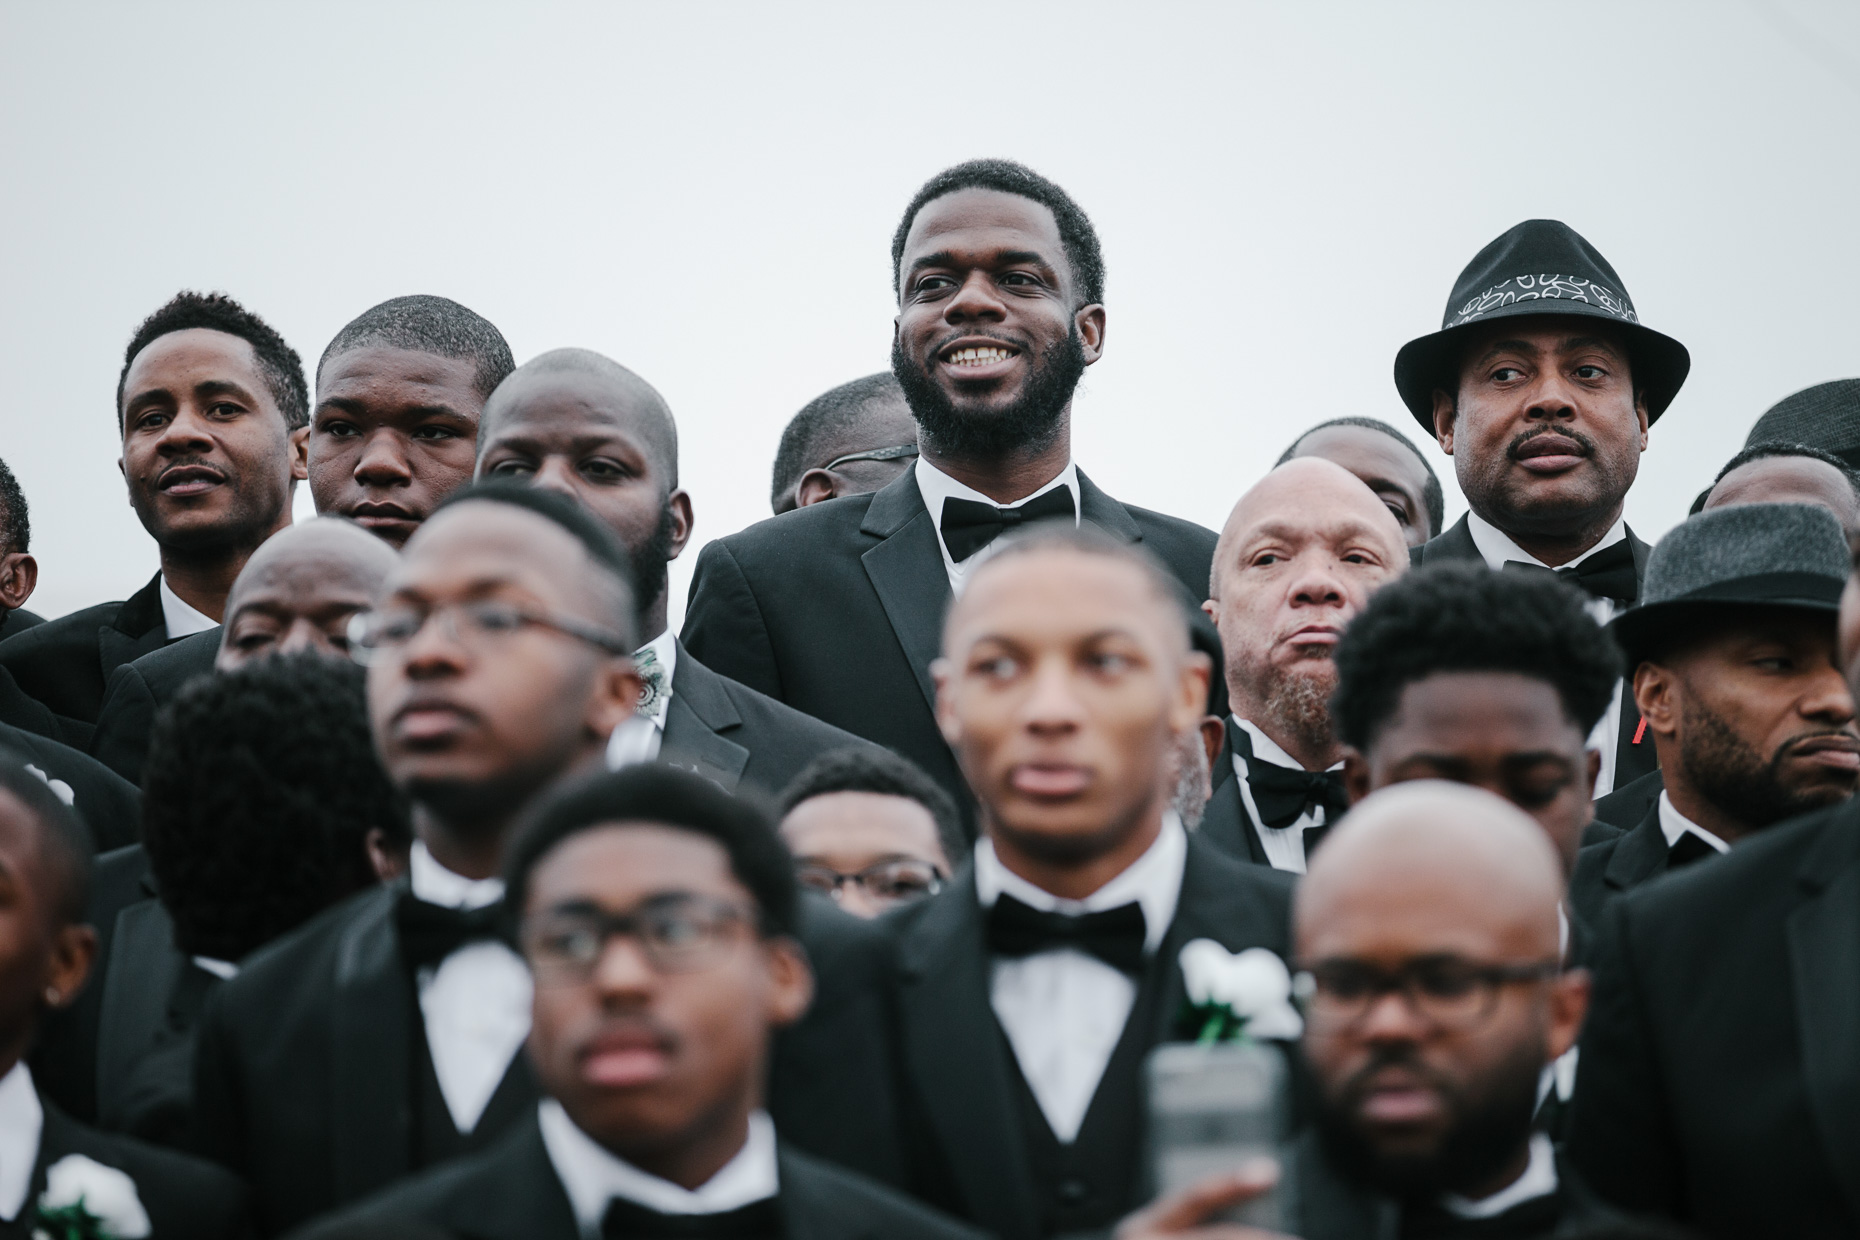 Participants of the 500 Black Tuxedos Event, organized by Andre Lee Ellis, gather for a group photo on the steps of the Milwaukee Art Museum on Saturday December 12th, 2015 in Milwaukee, Wisconsin.